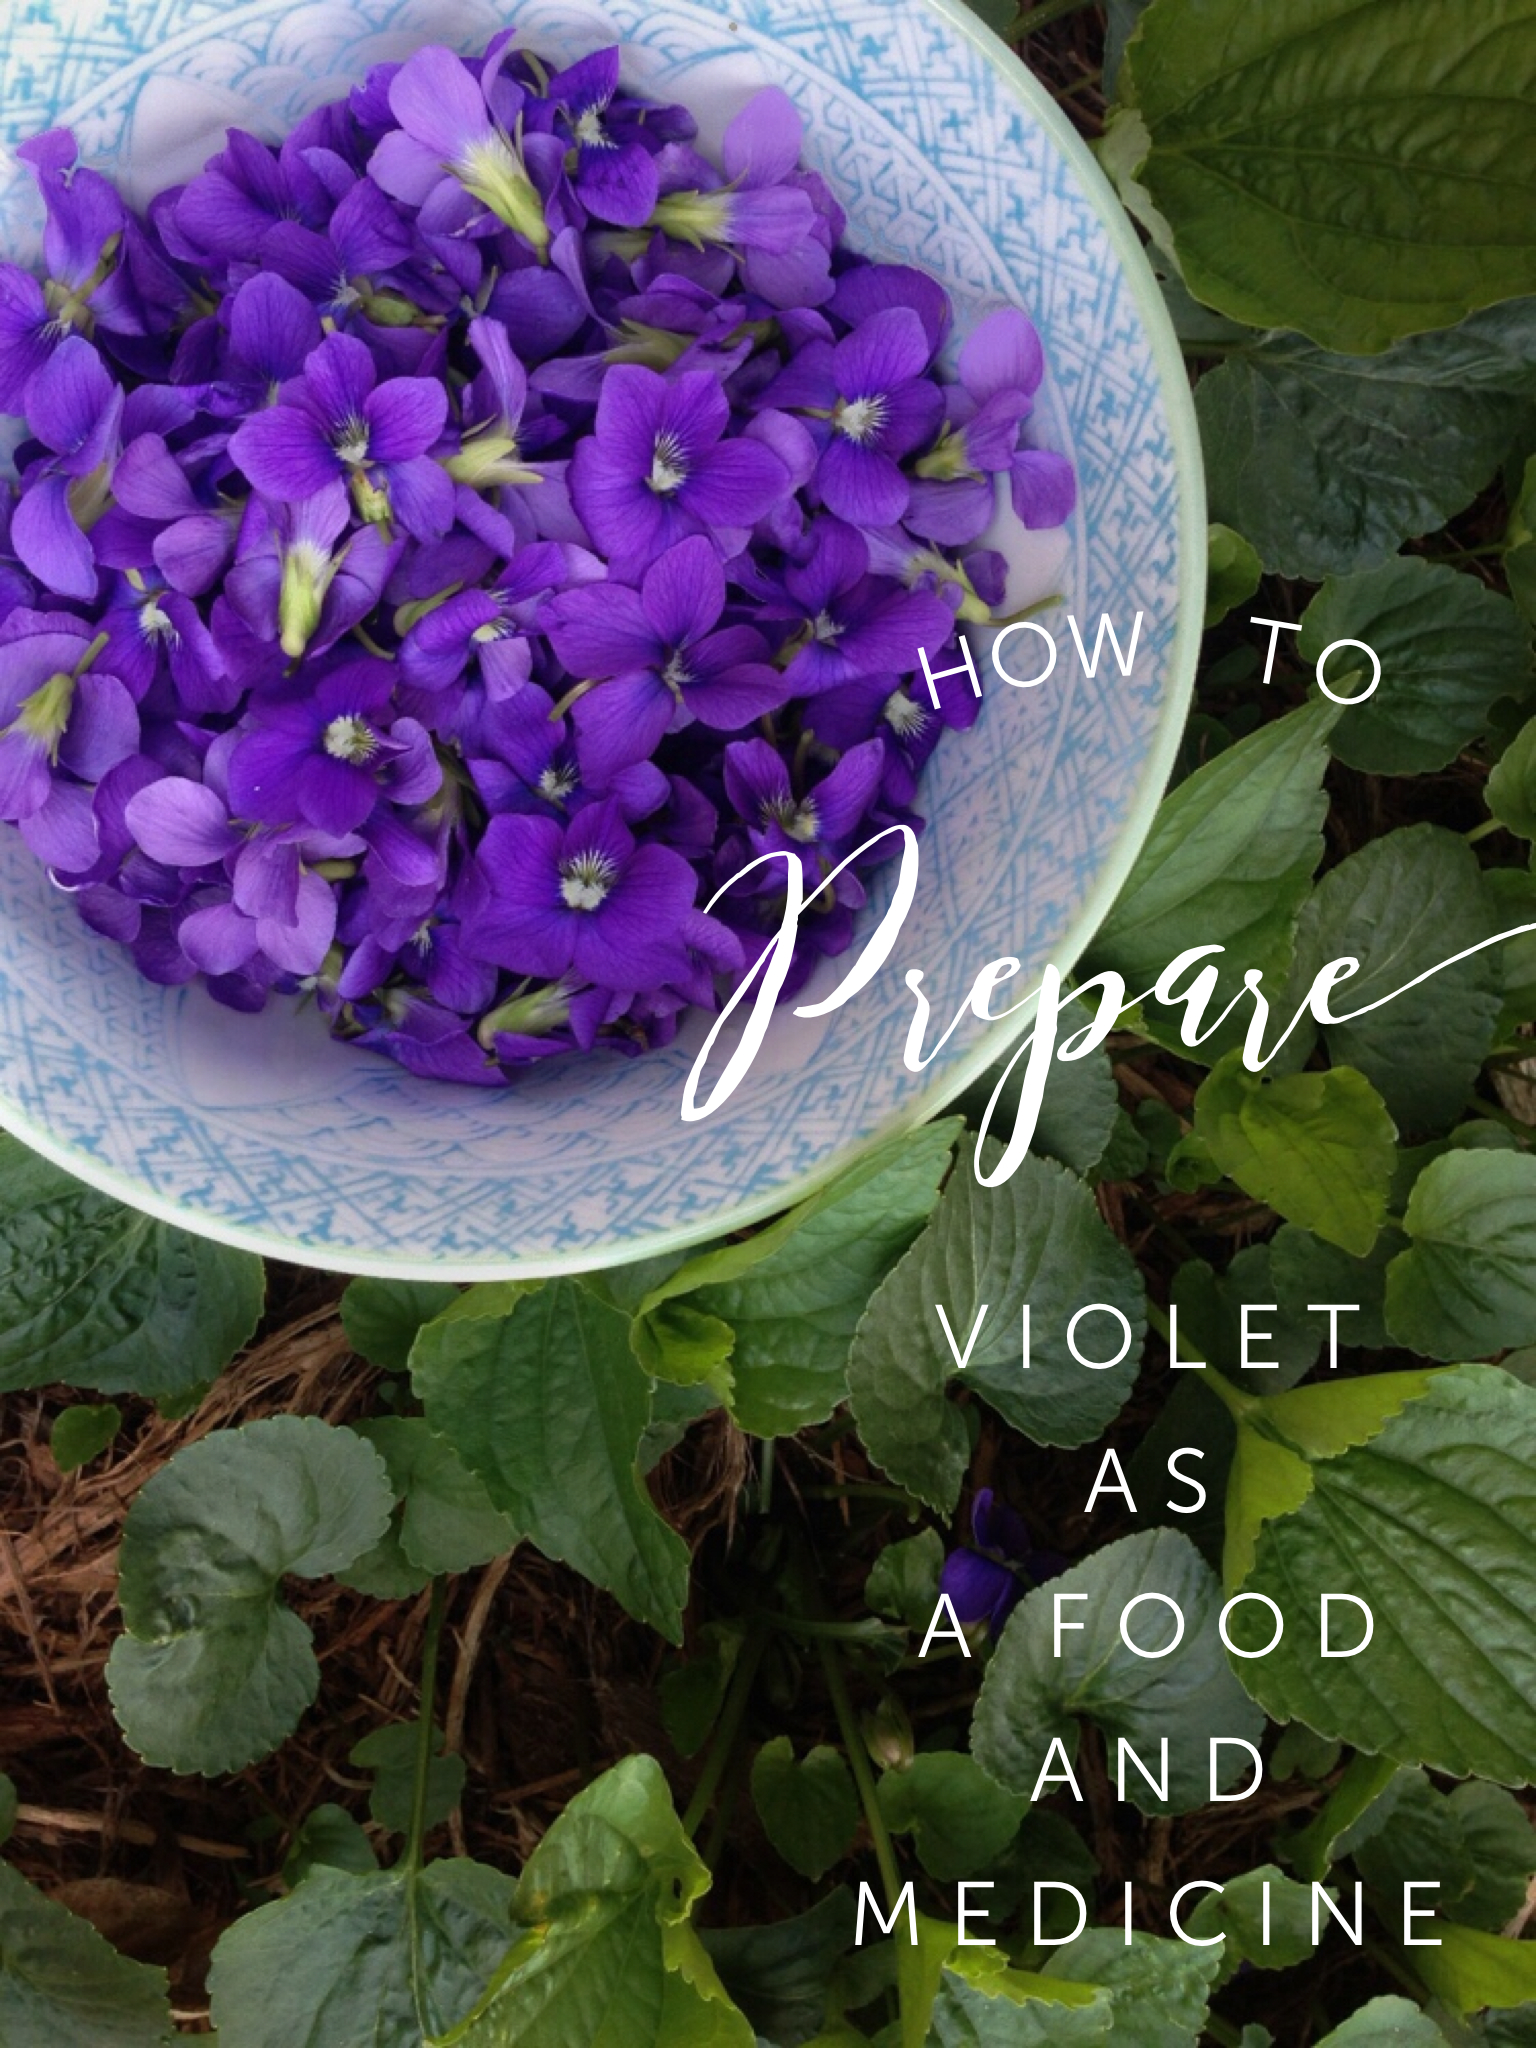 How to prepare violet as a food and medicine by Blog Castanea